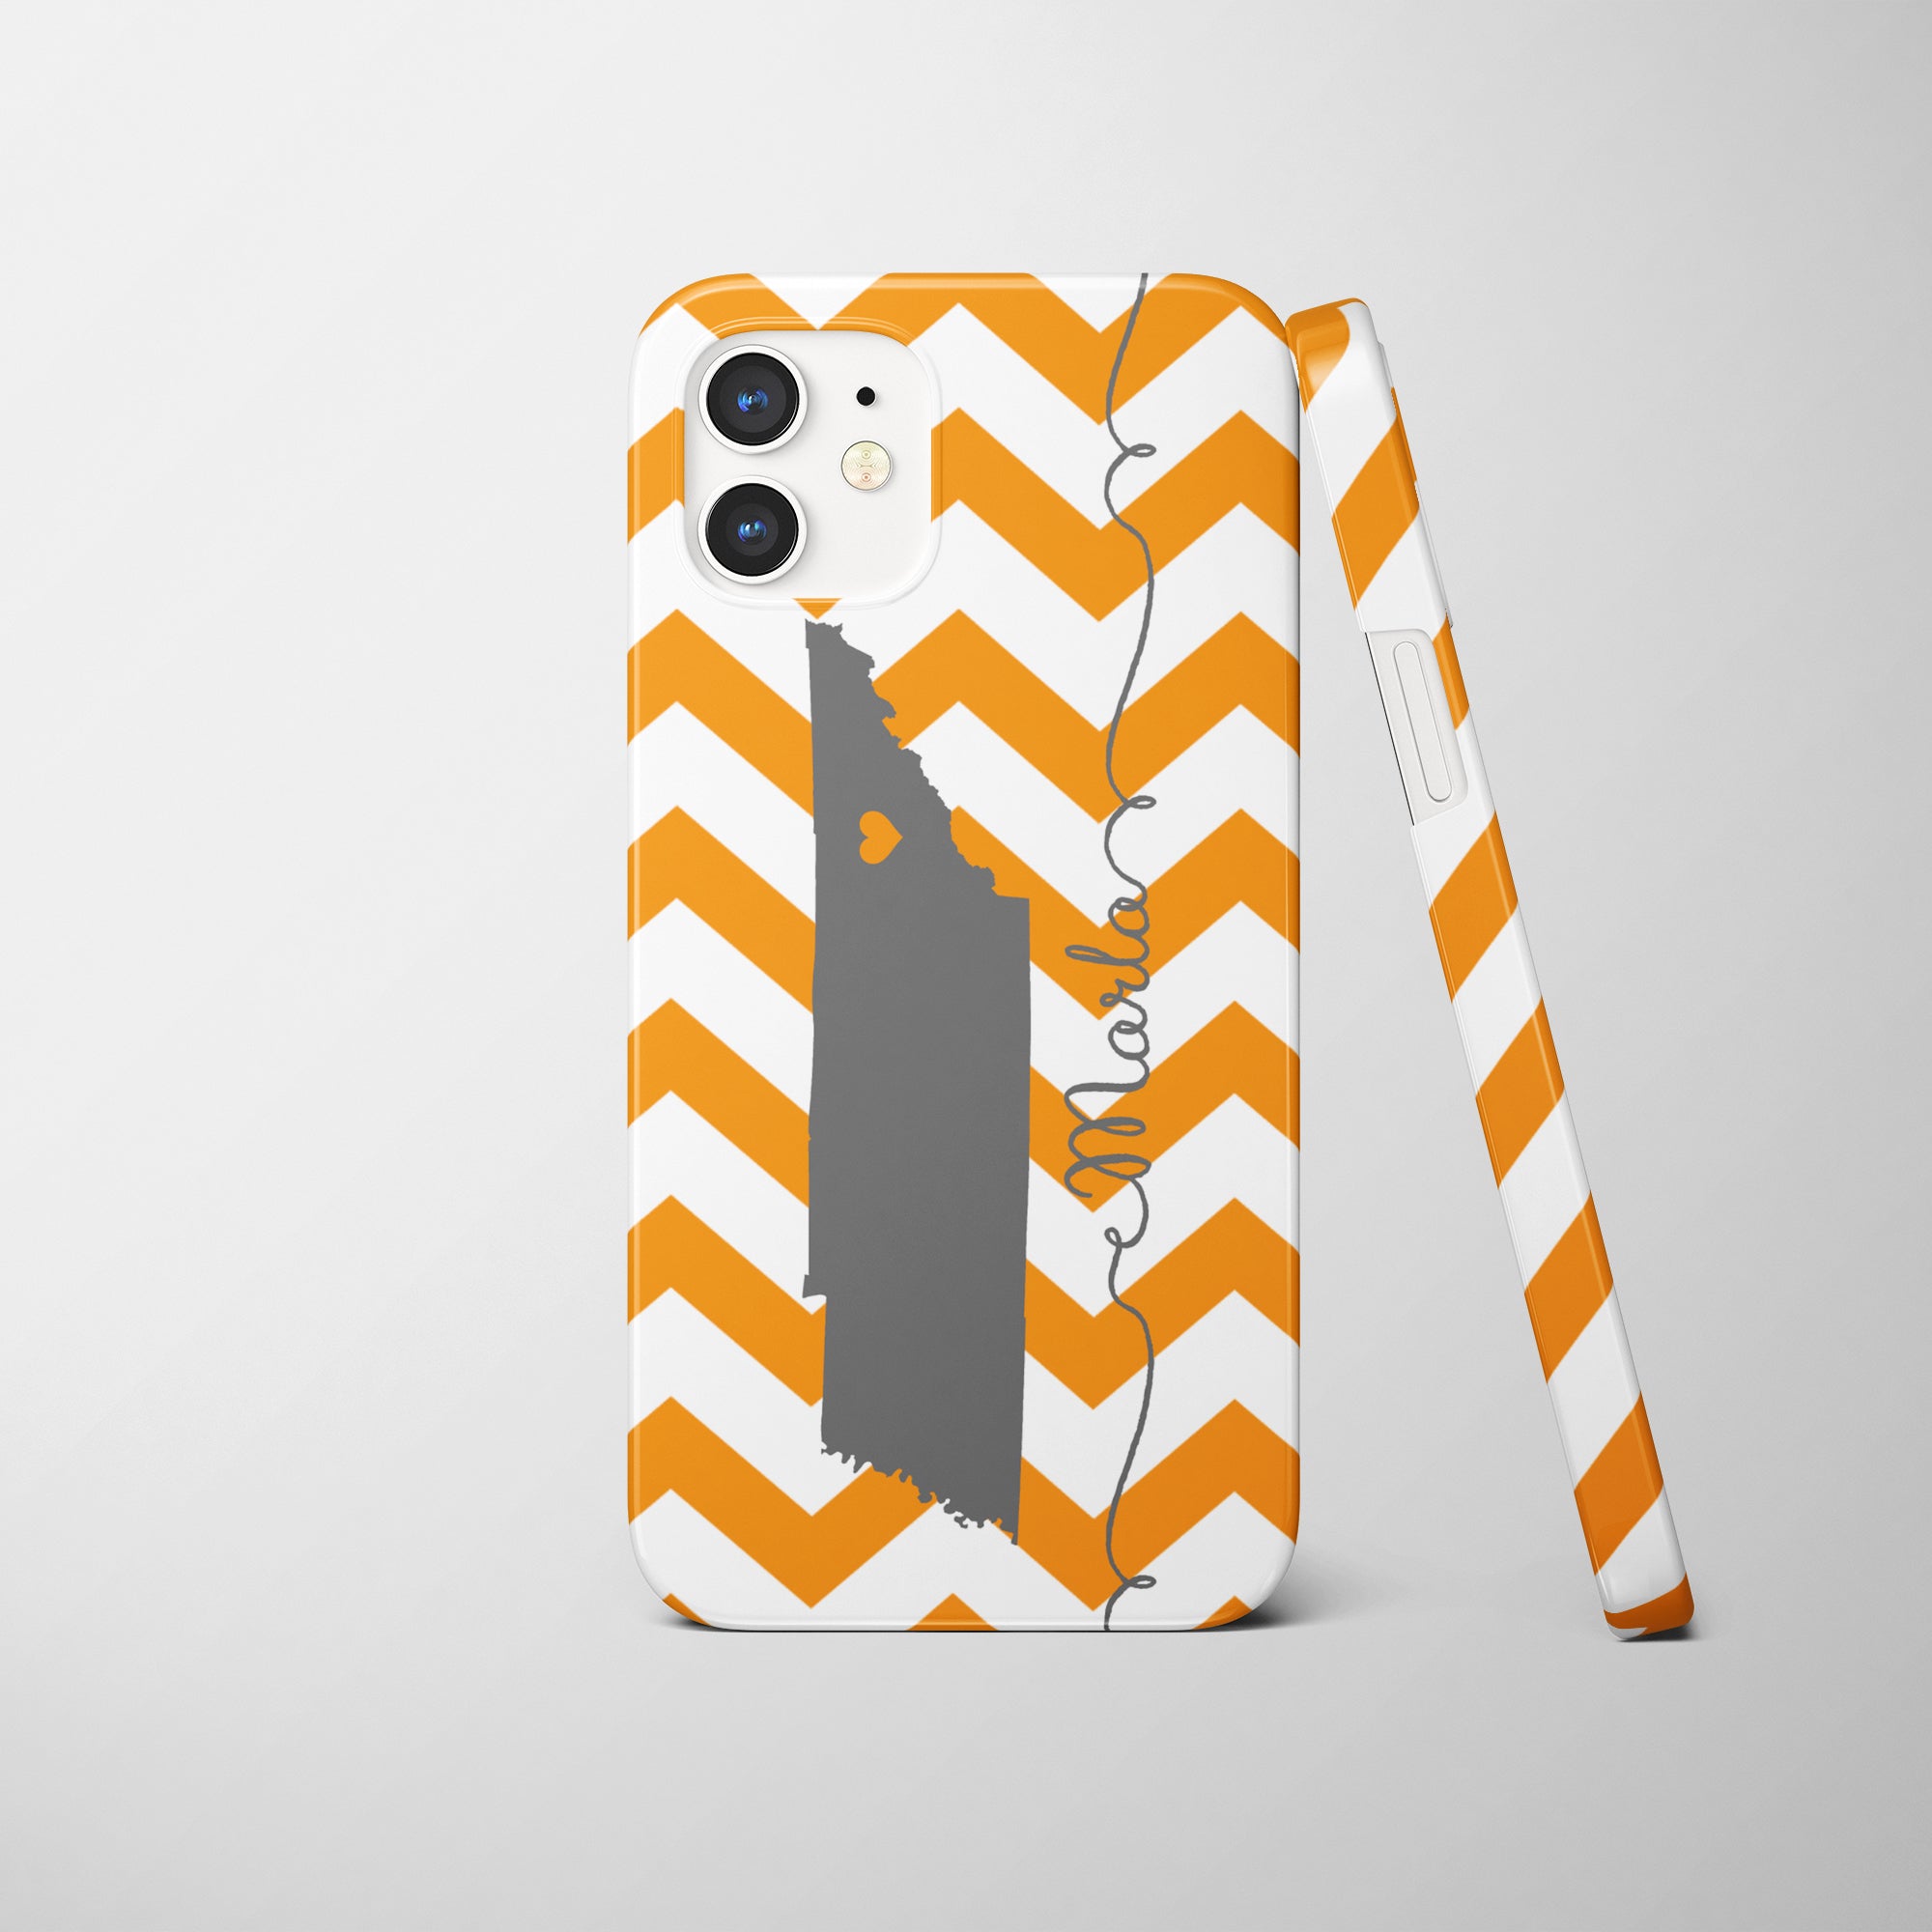 Personalized Tennessee iPhone case, with chevron stripes and a heart placed over your favorite city. The sample shows a heart over Knoxville, but that can be moved to any other city like Nashville, Memphis, or Chattanooga